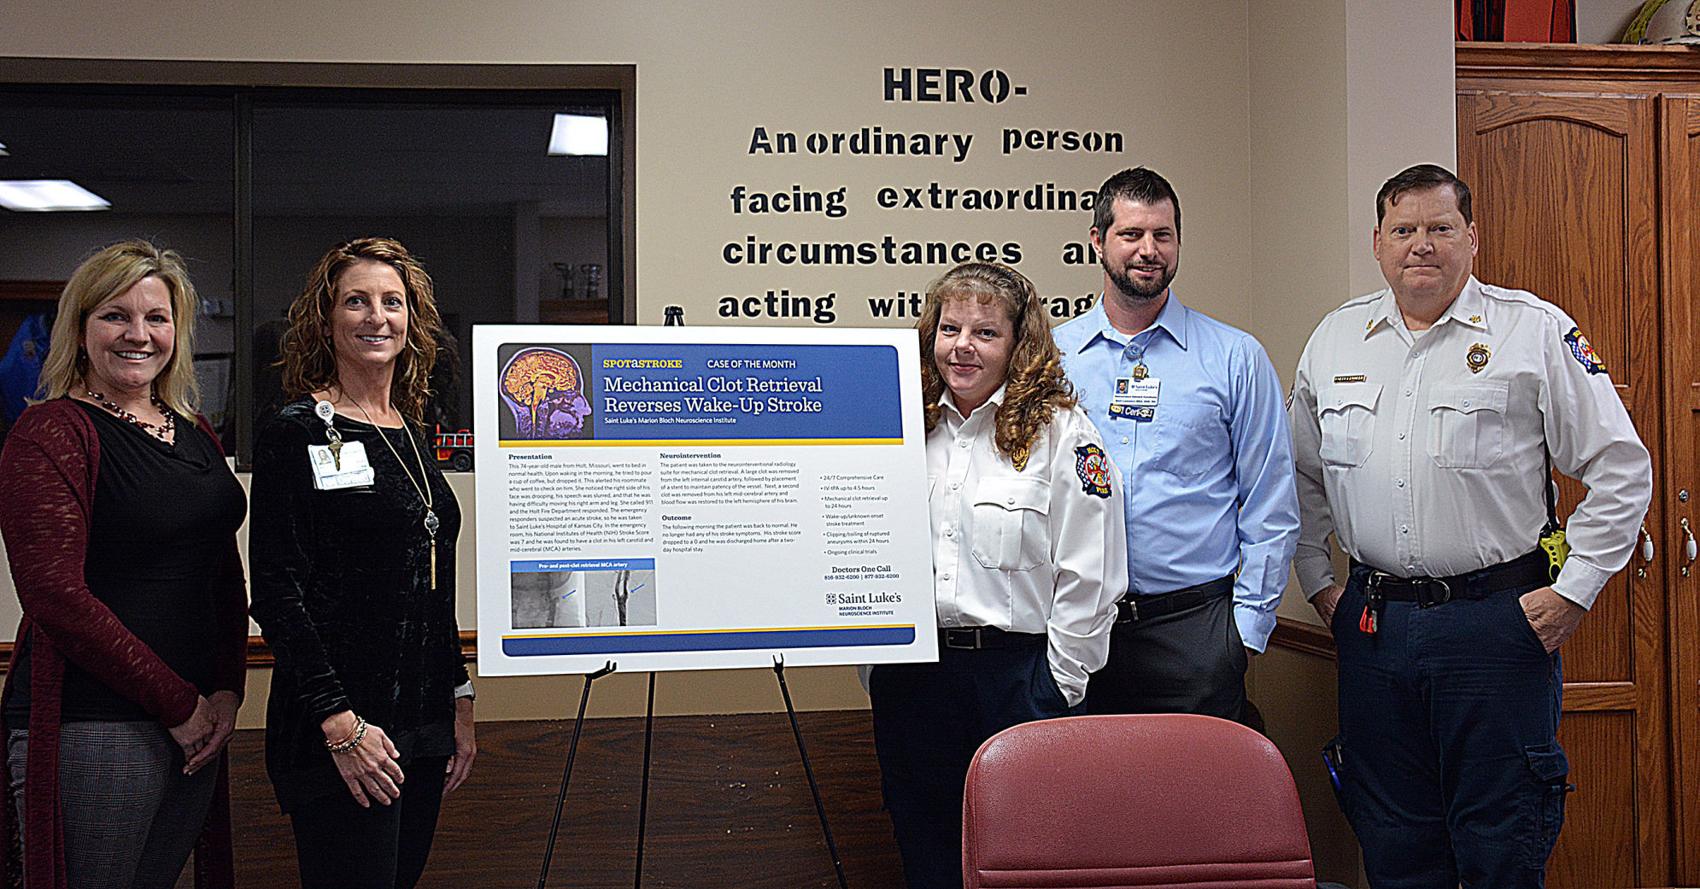 Courier Tribune: Hospital Honors Fire District for Stroke Patient Care